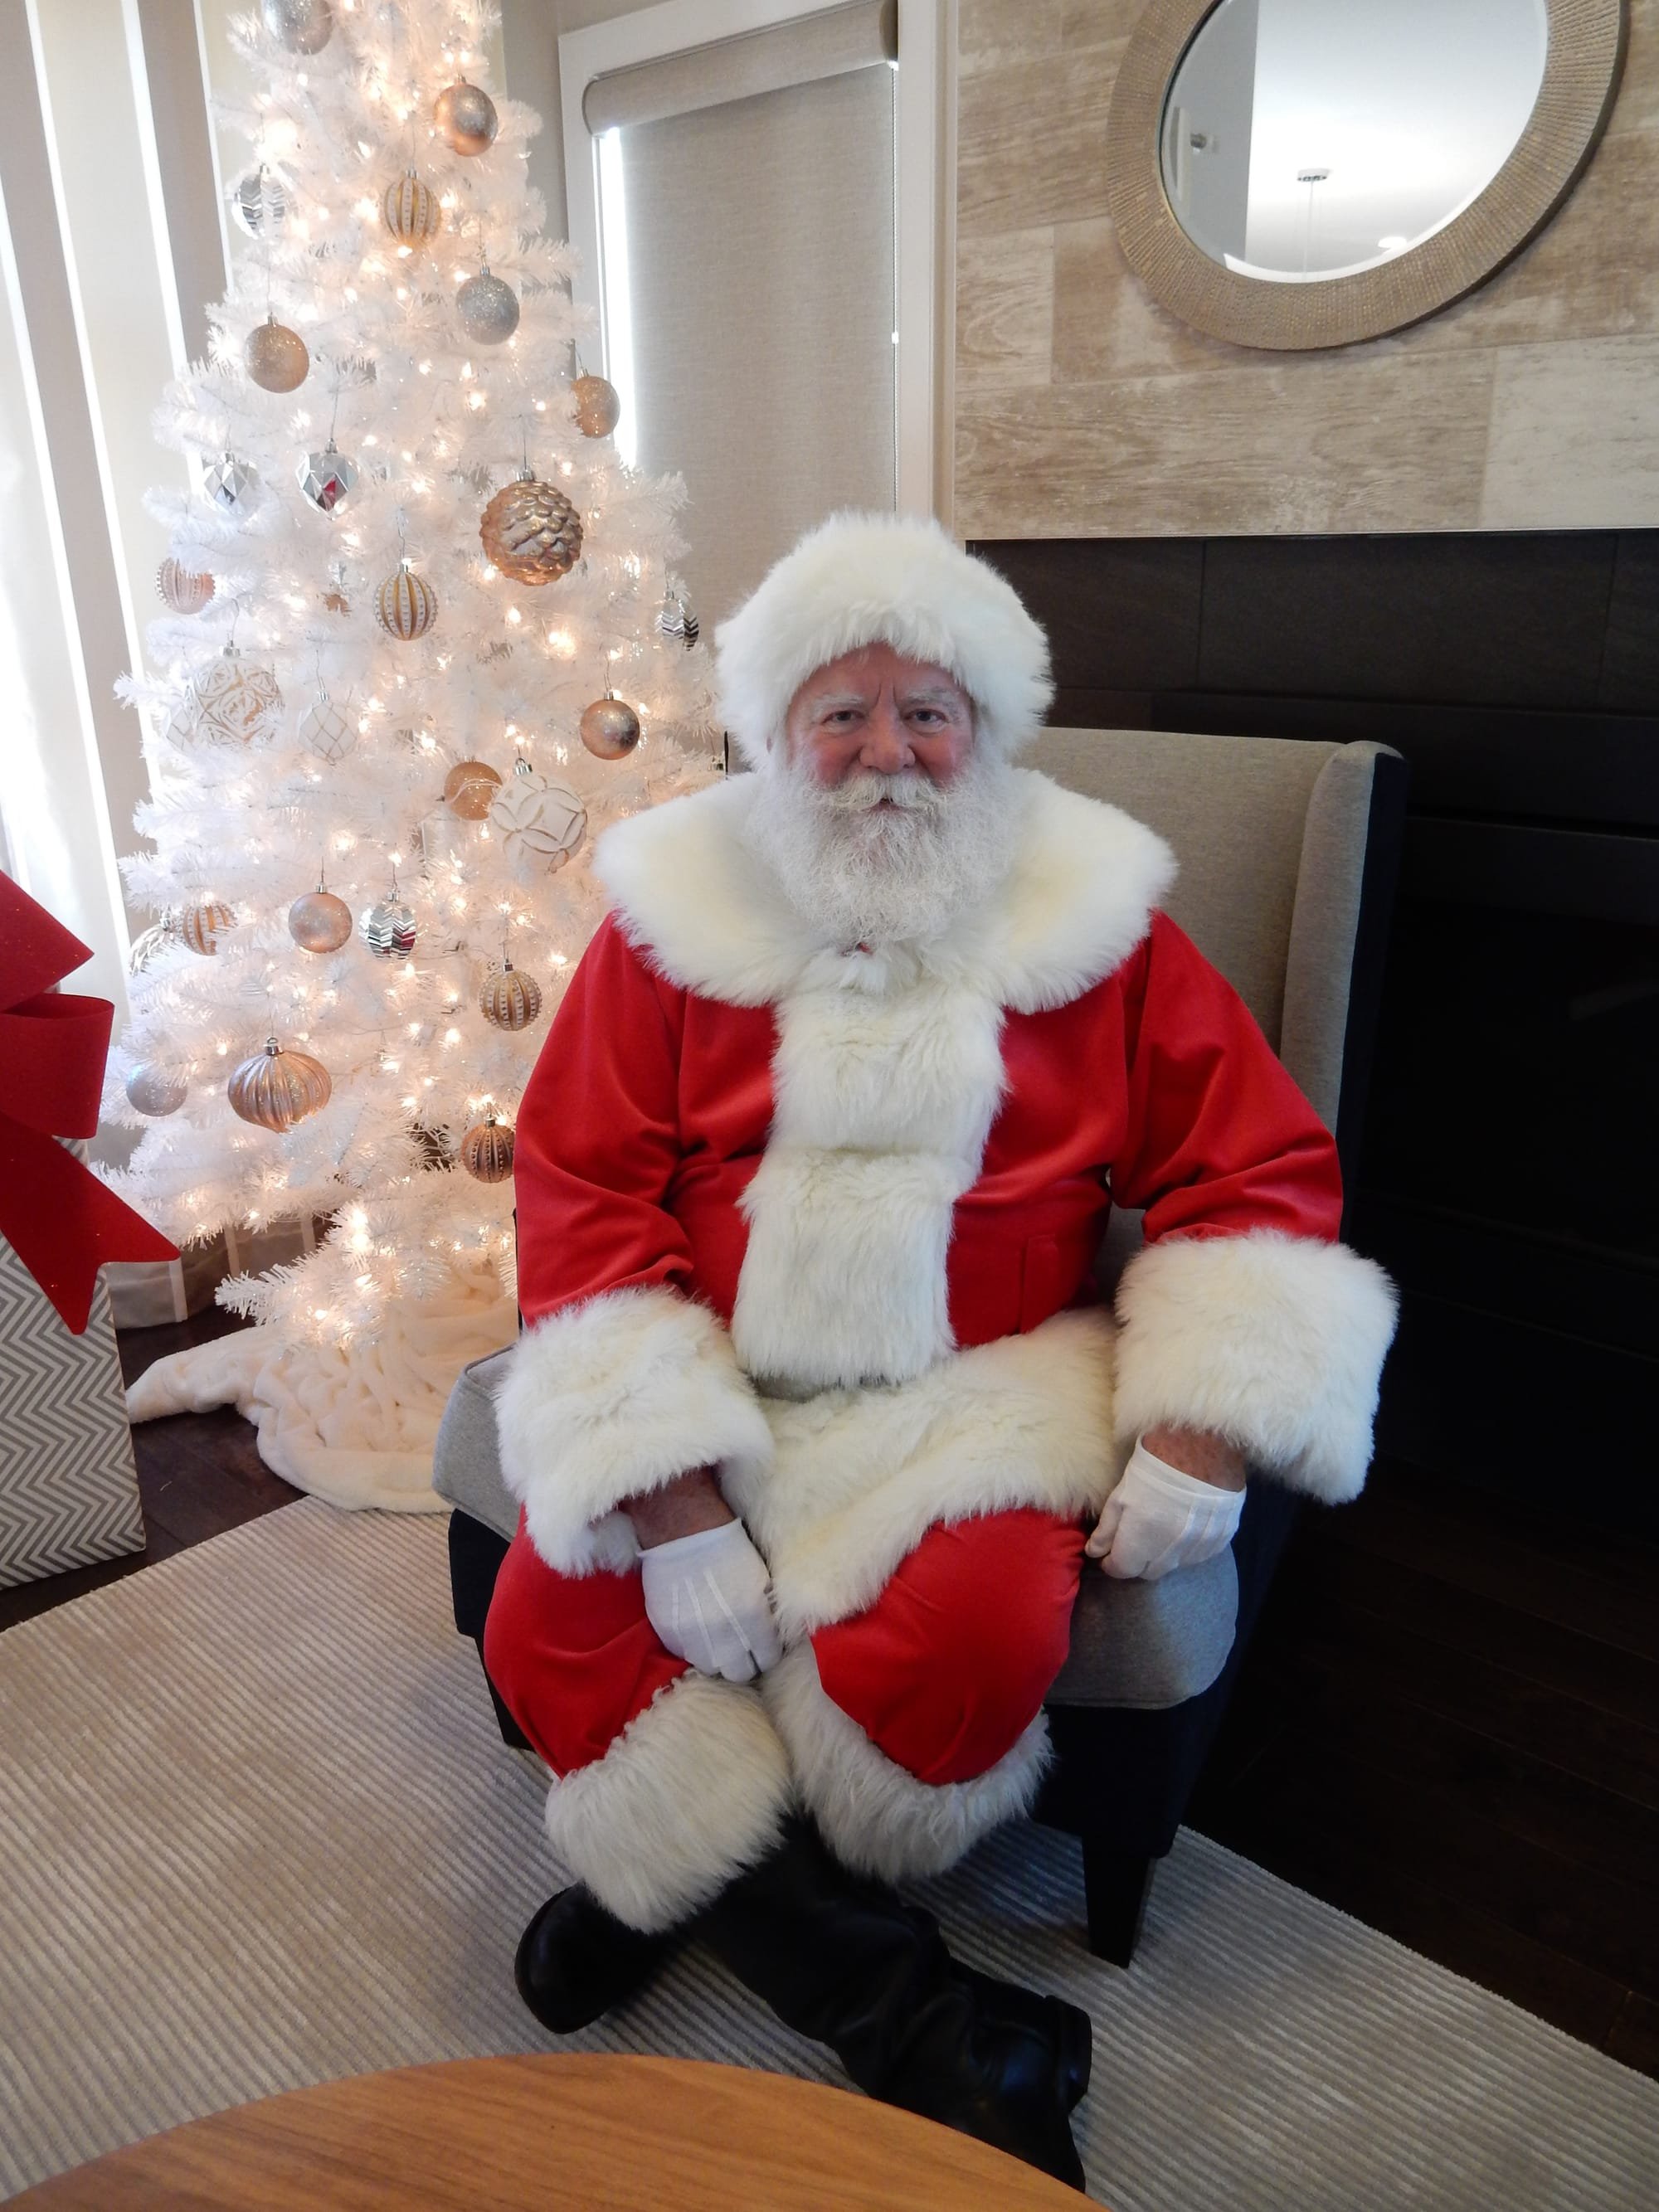 Experience the magic of Christmas in Edmonton, hire your very own Santa Claus!